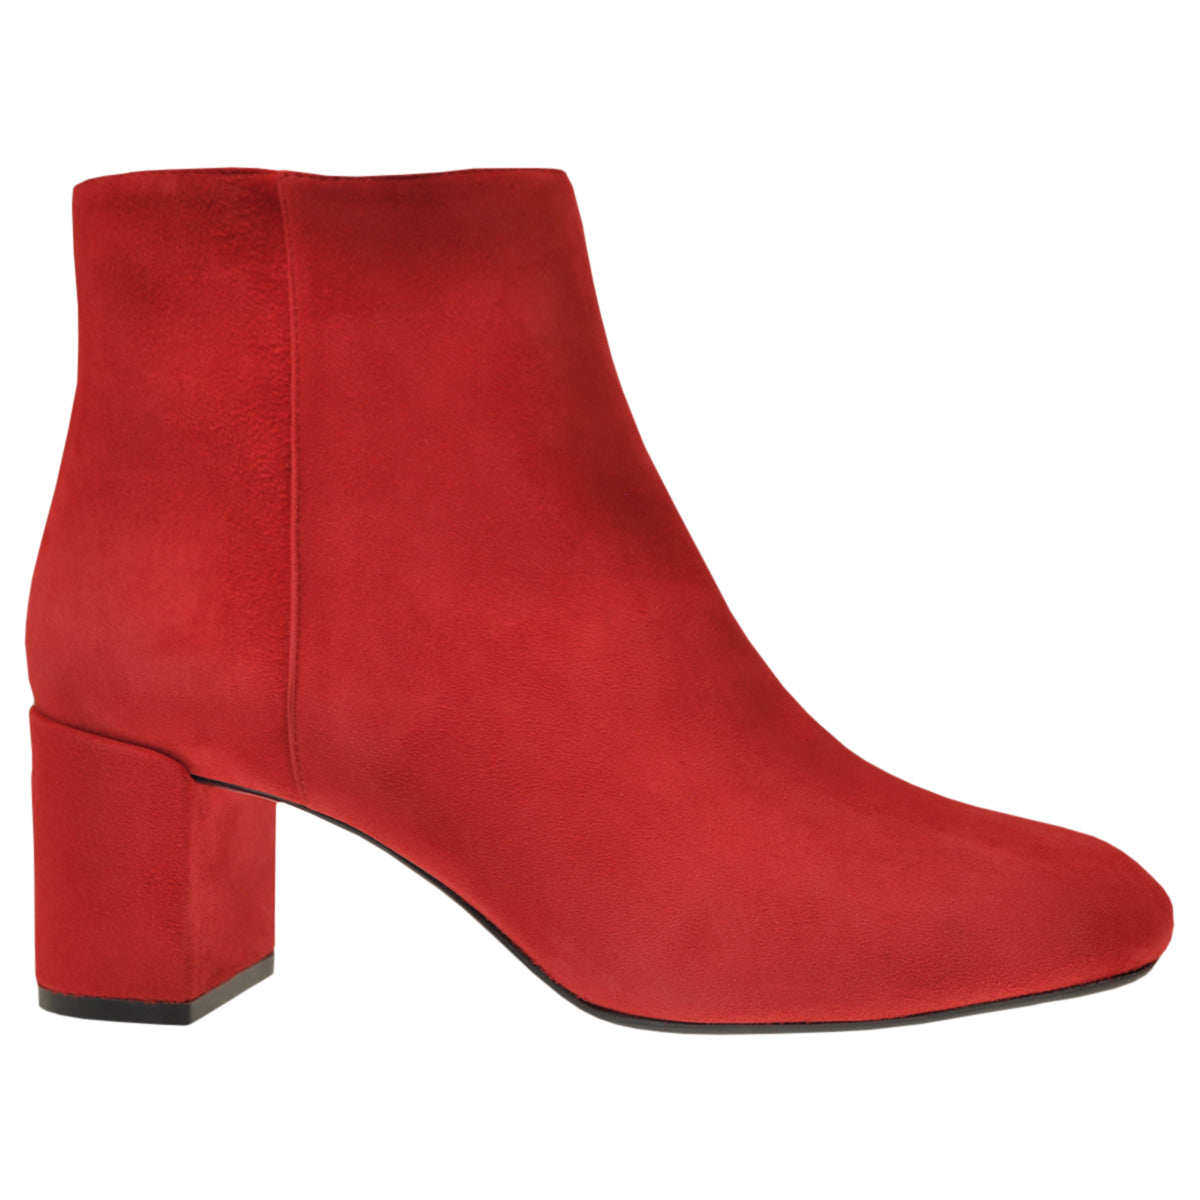 Mid heel Ankle boots in Red Suede